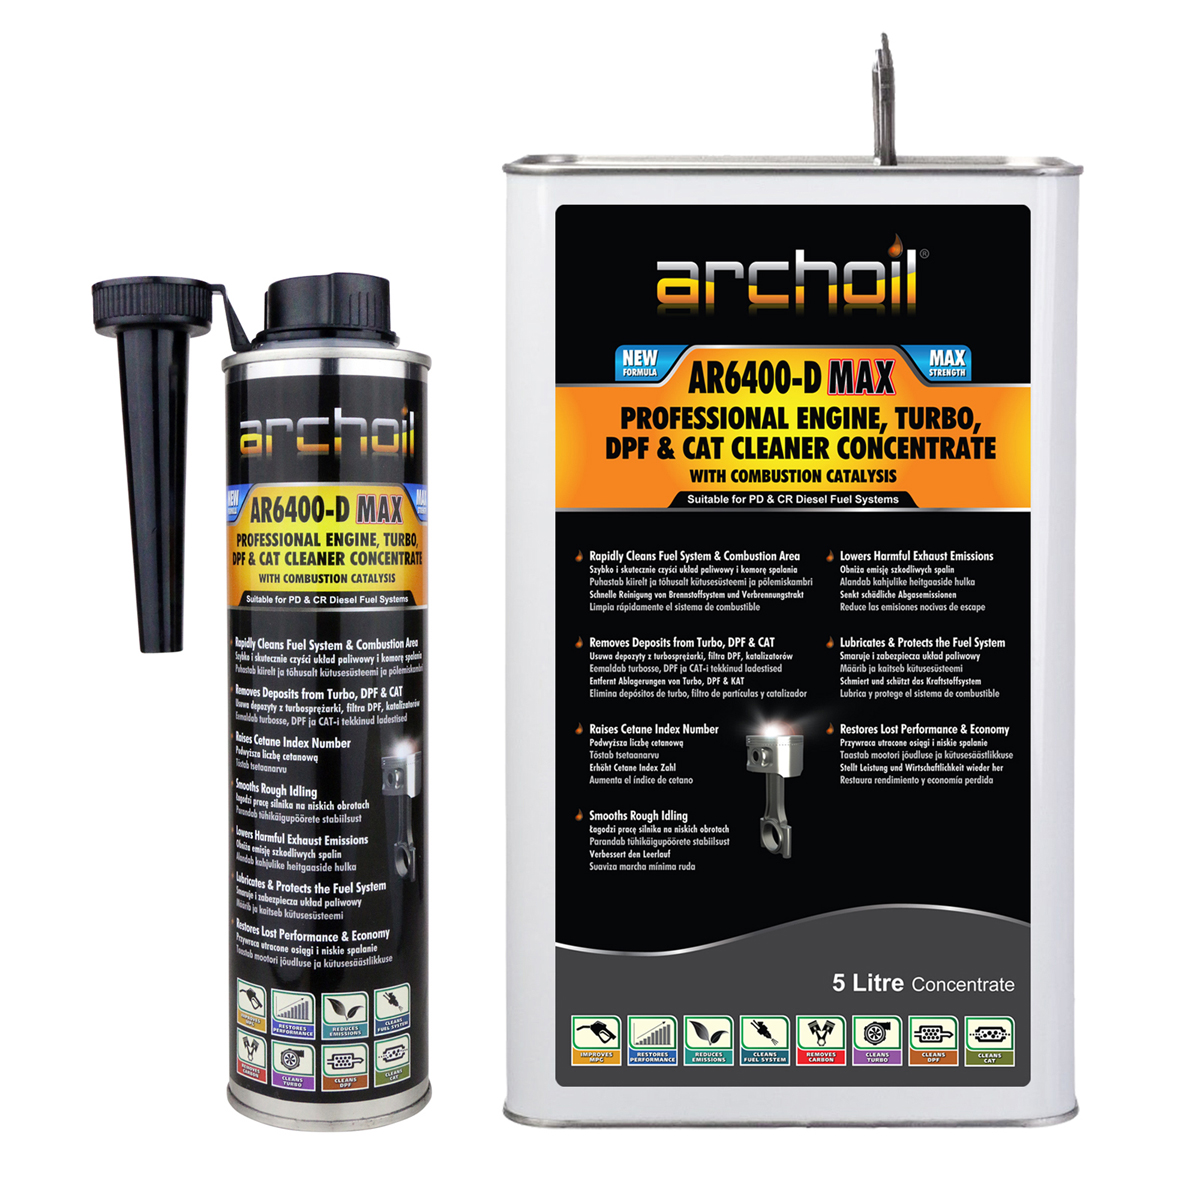 Archoil AR6400-D MAX Professional Diesel Engine, Turbo, DPF & CAT Cleaner Concentrate